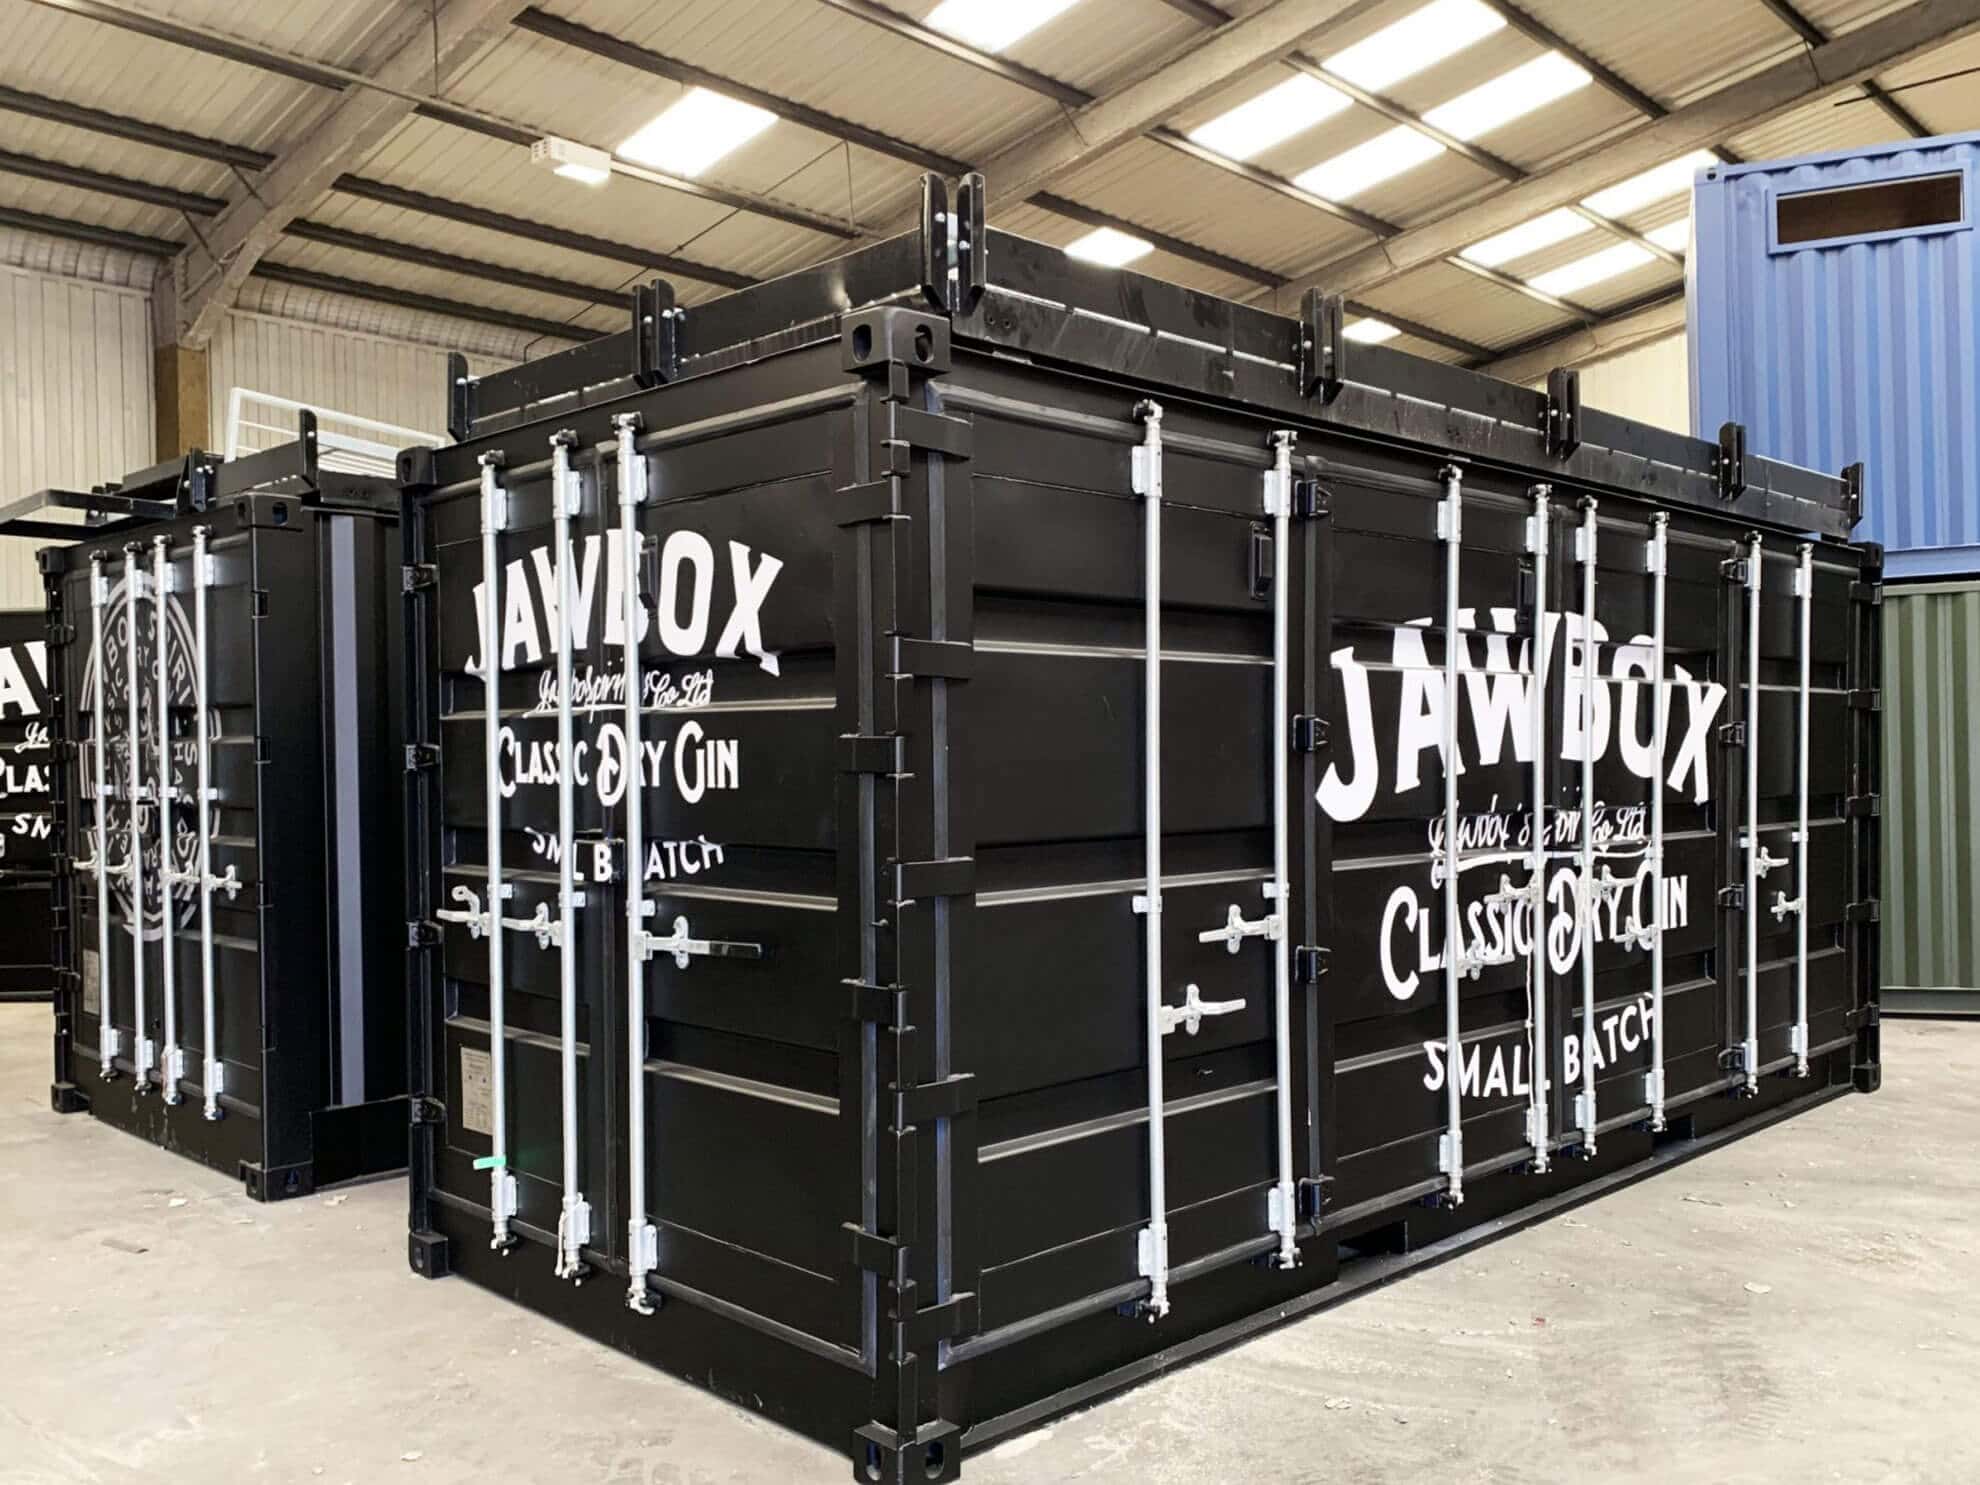 Jawbox classic dry gin - branded shipping containers.